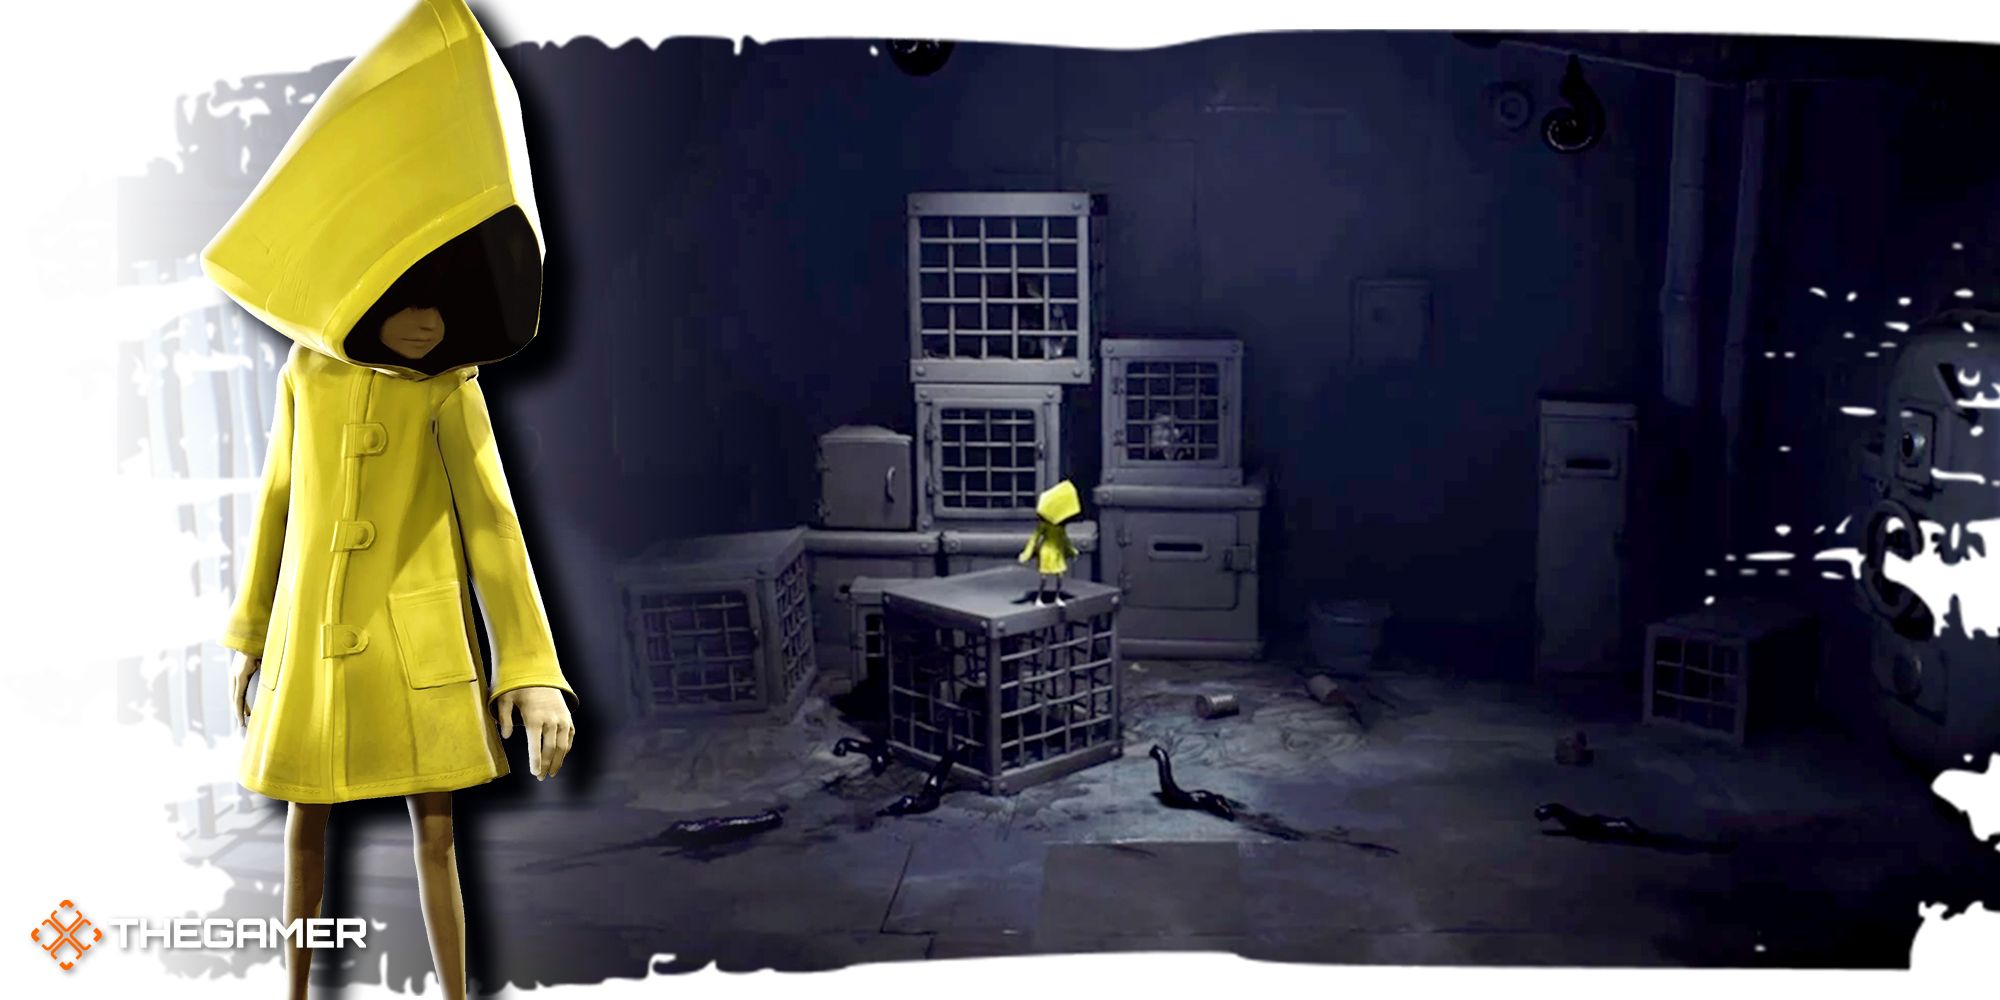 7-Little Nightmares Chapter 1 The Prison Complete Walkthrough